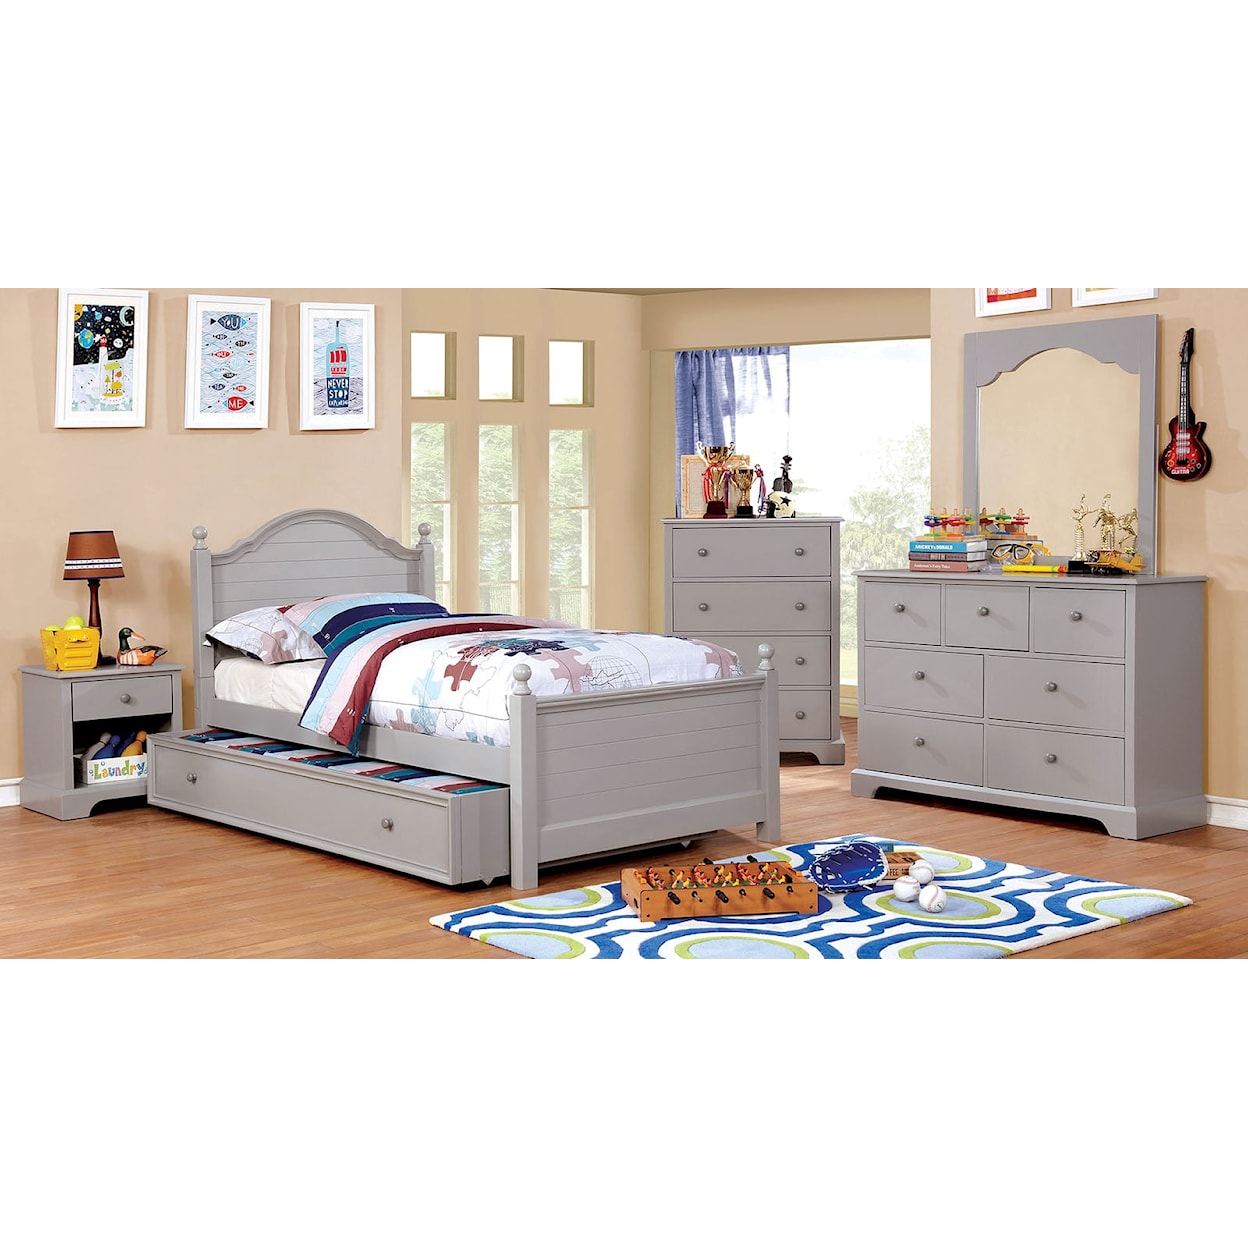 Furniture of America Diane 4 Pc. Twin Bedroom Set w/ Trundle